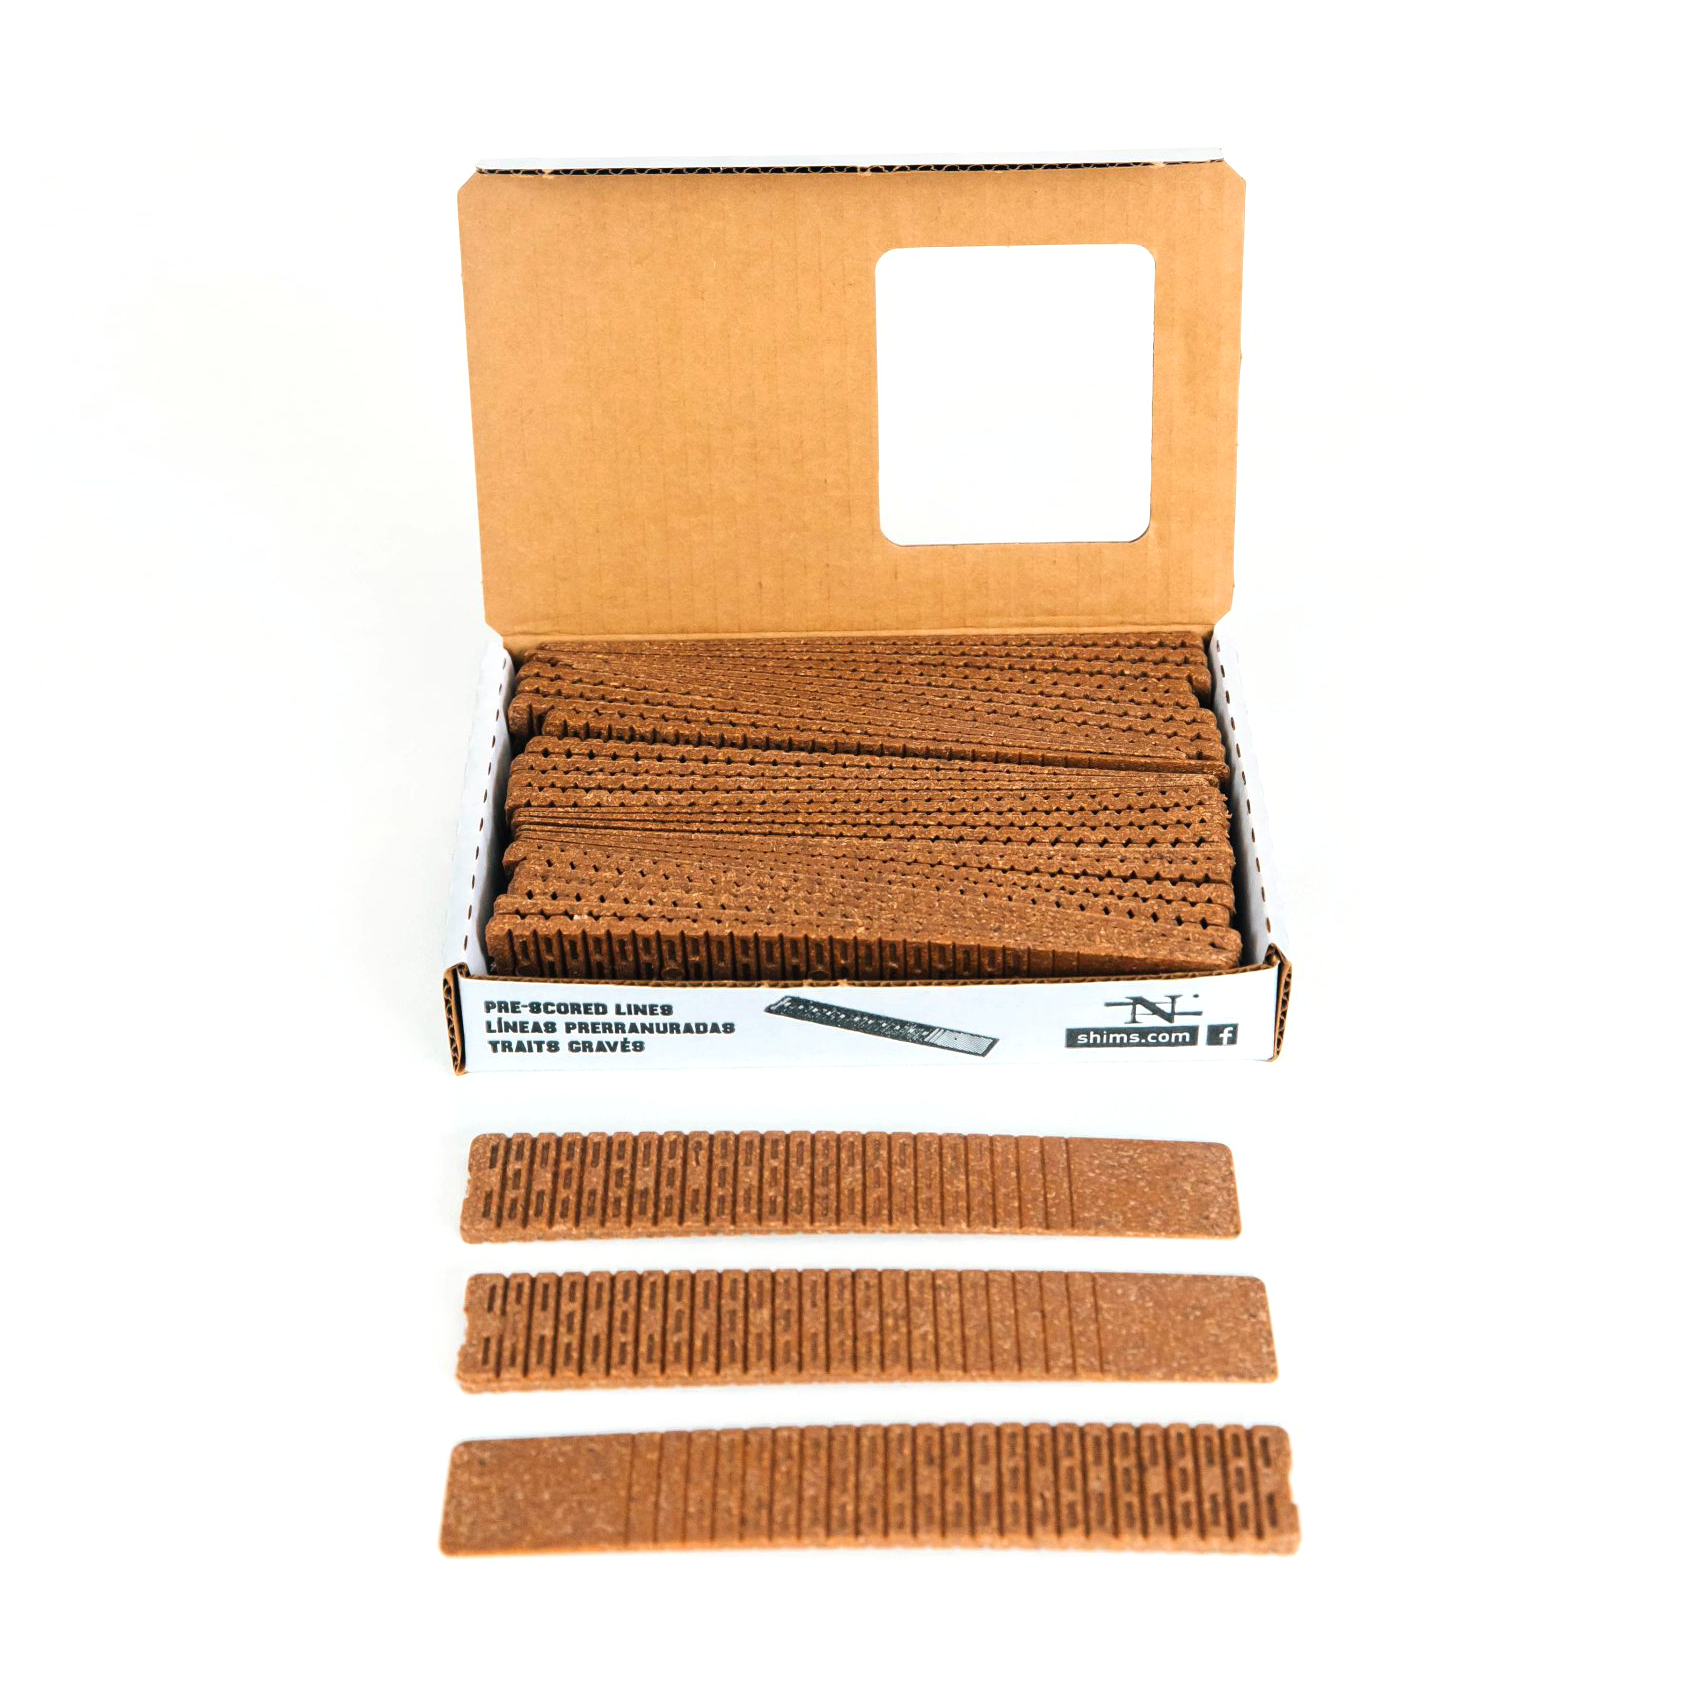 Lined Composite Carton 32 Count – 8 Inch Composite Shims